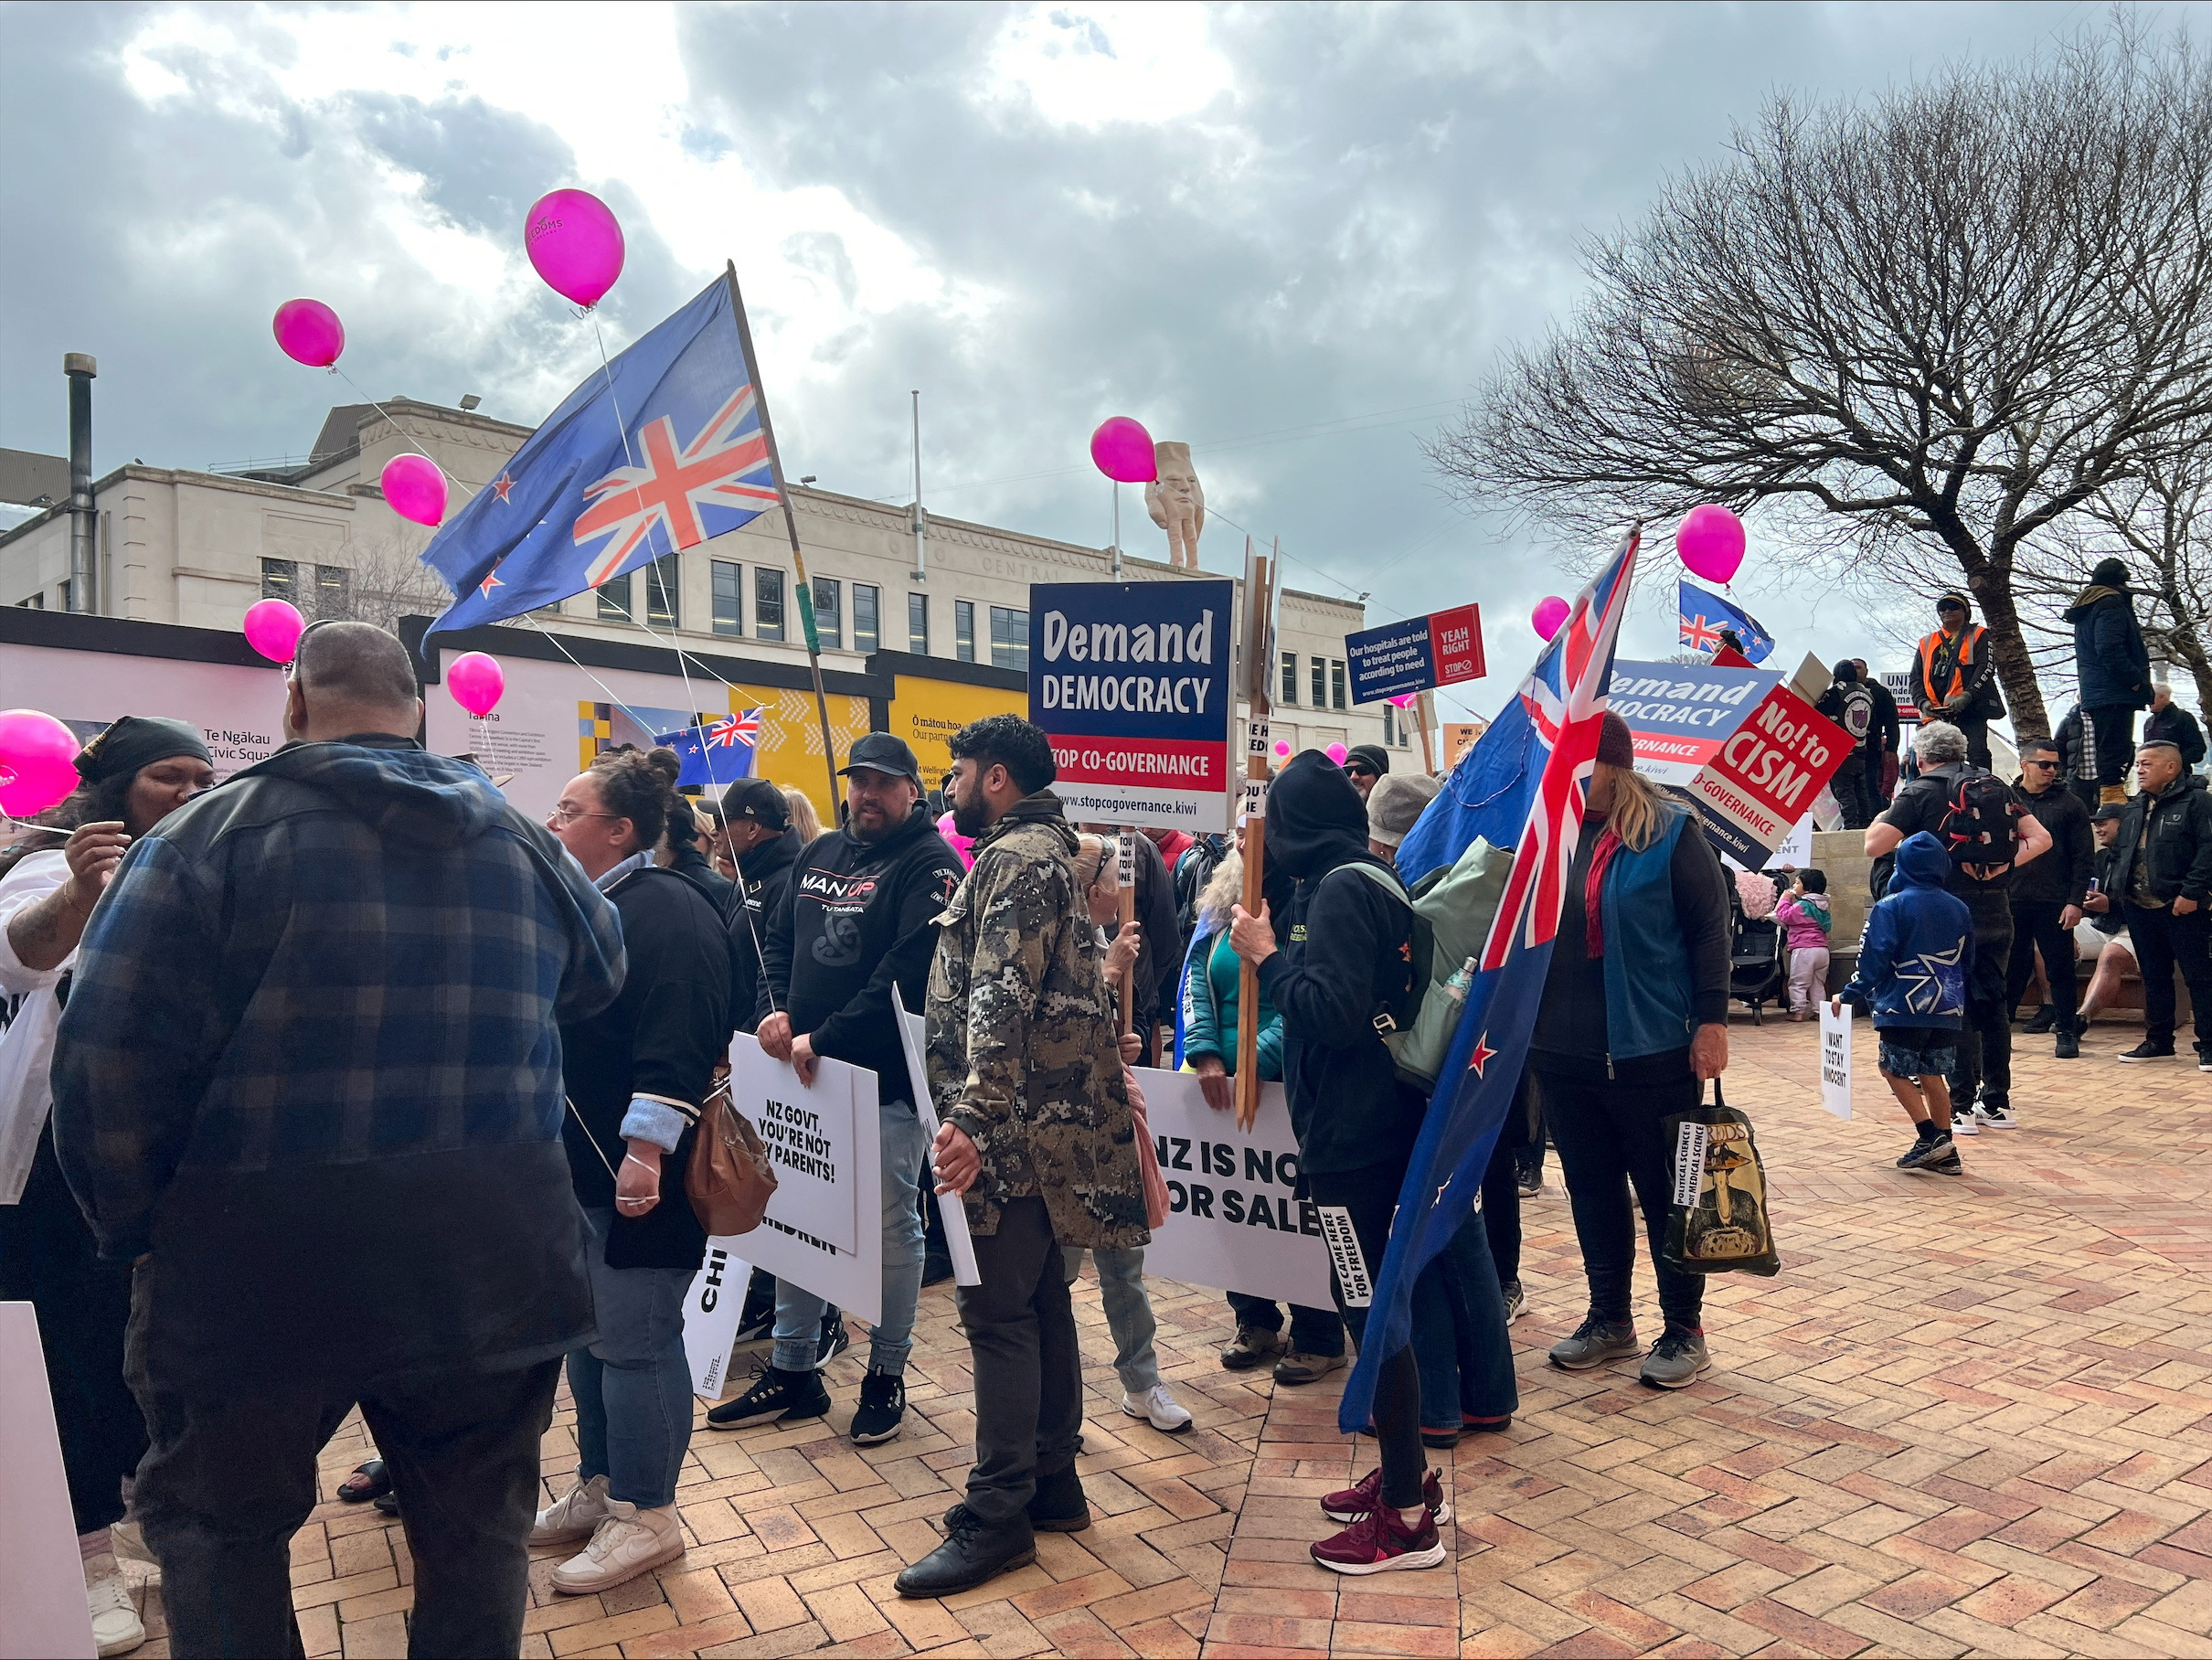 Anti co-governance protesters march on New Zealand's parliament in Wellington